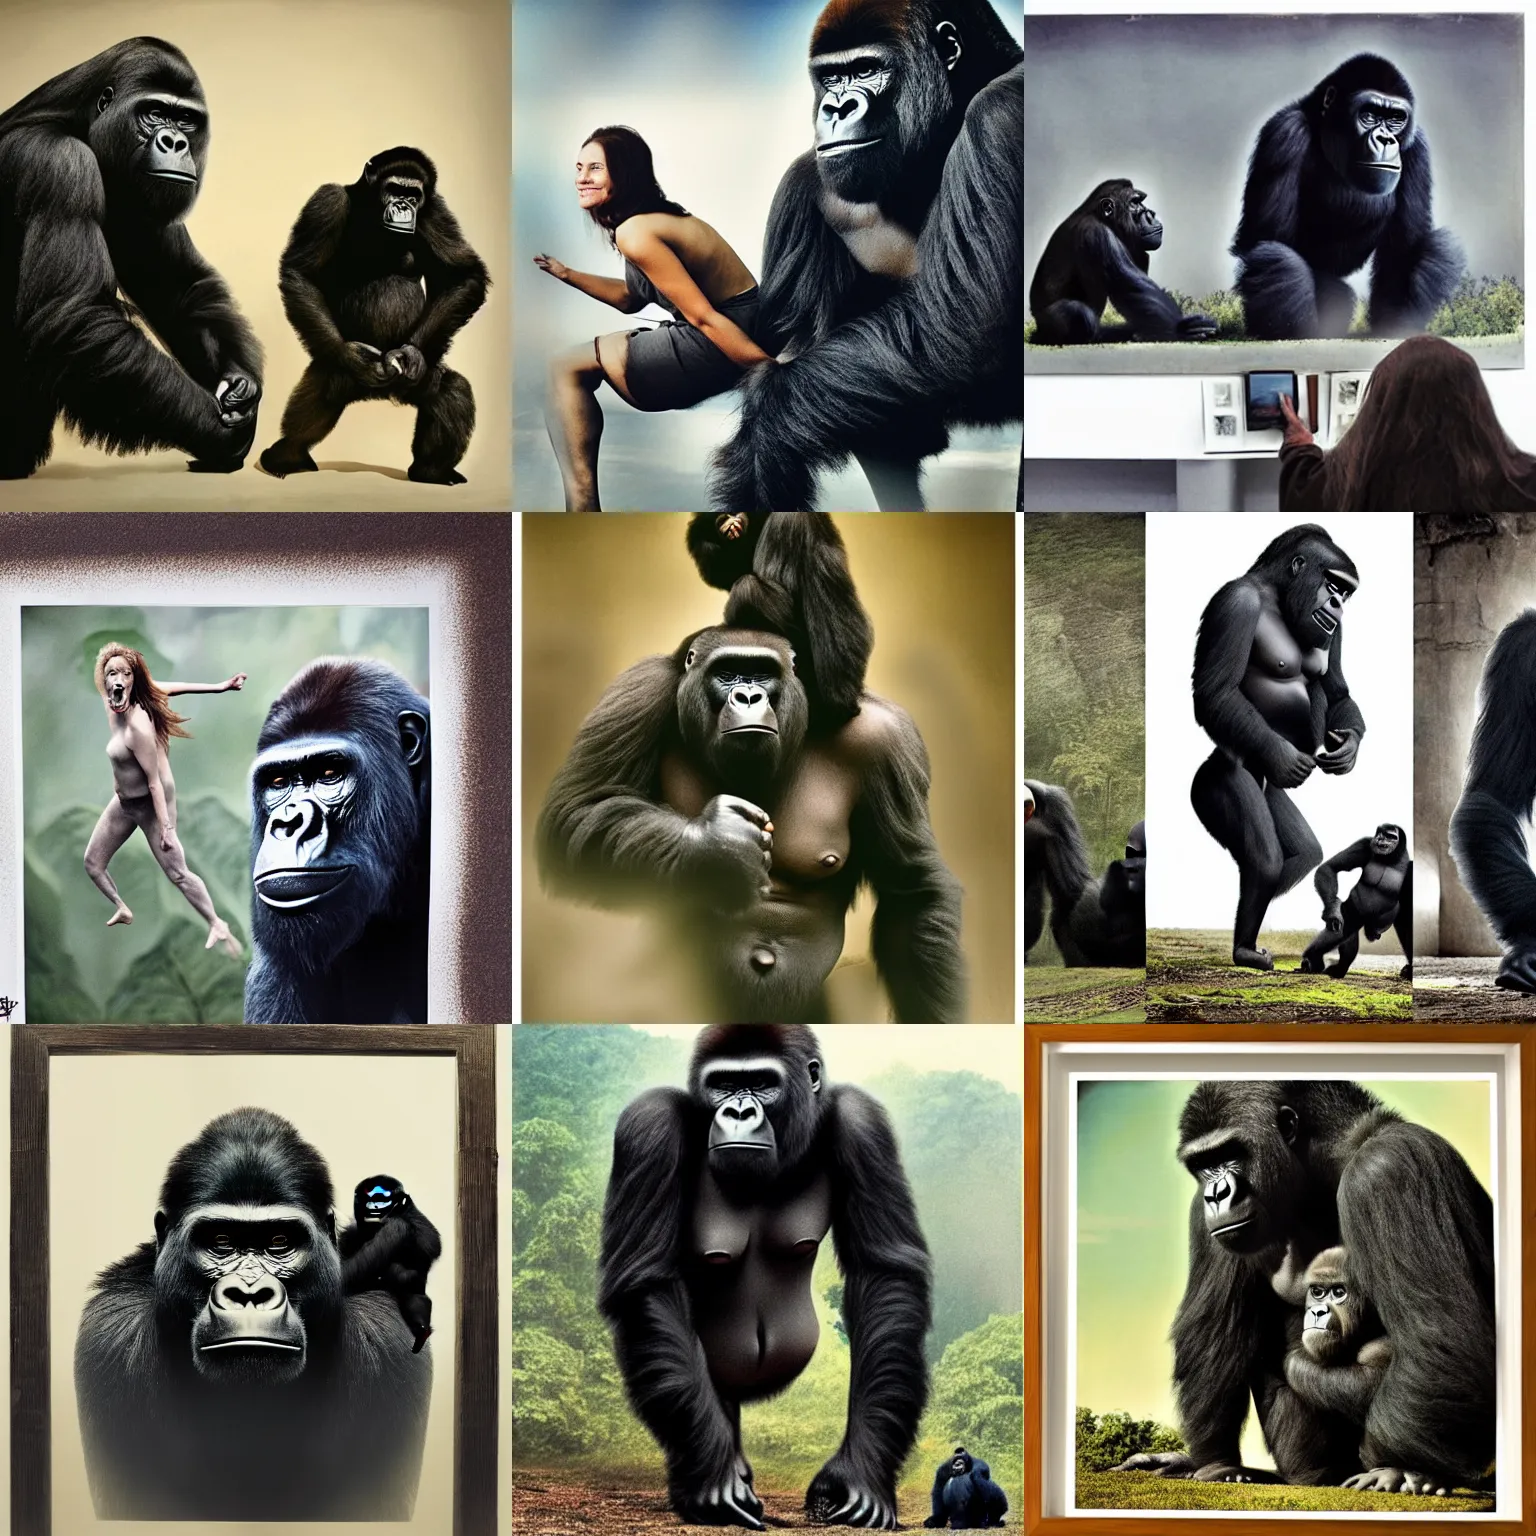 Prompt: Picture of a woman and a gorilla by Annie Leibovitz in the style of King Kong